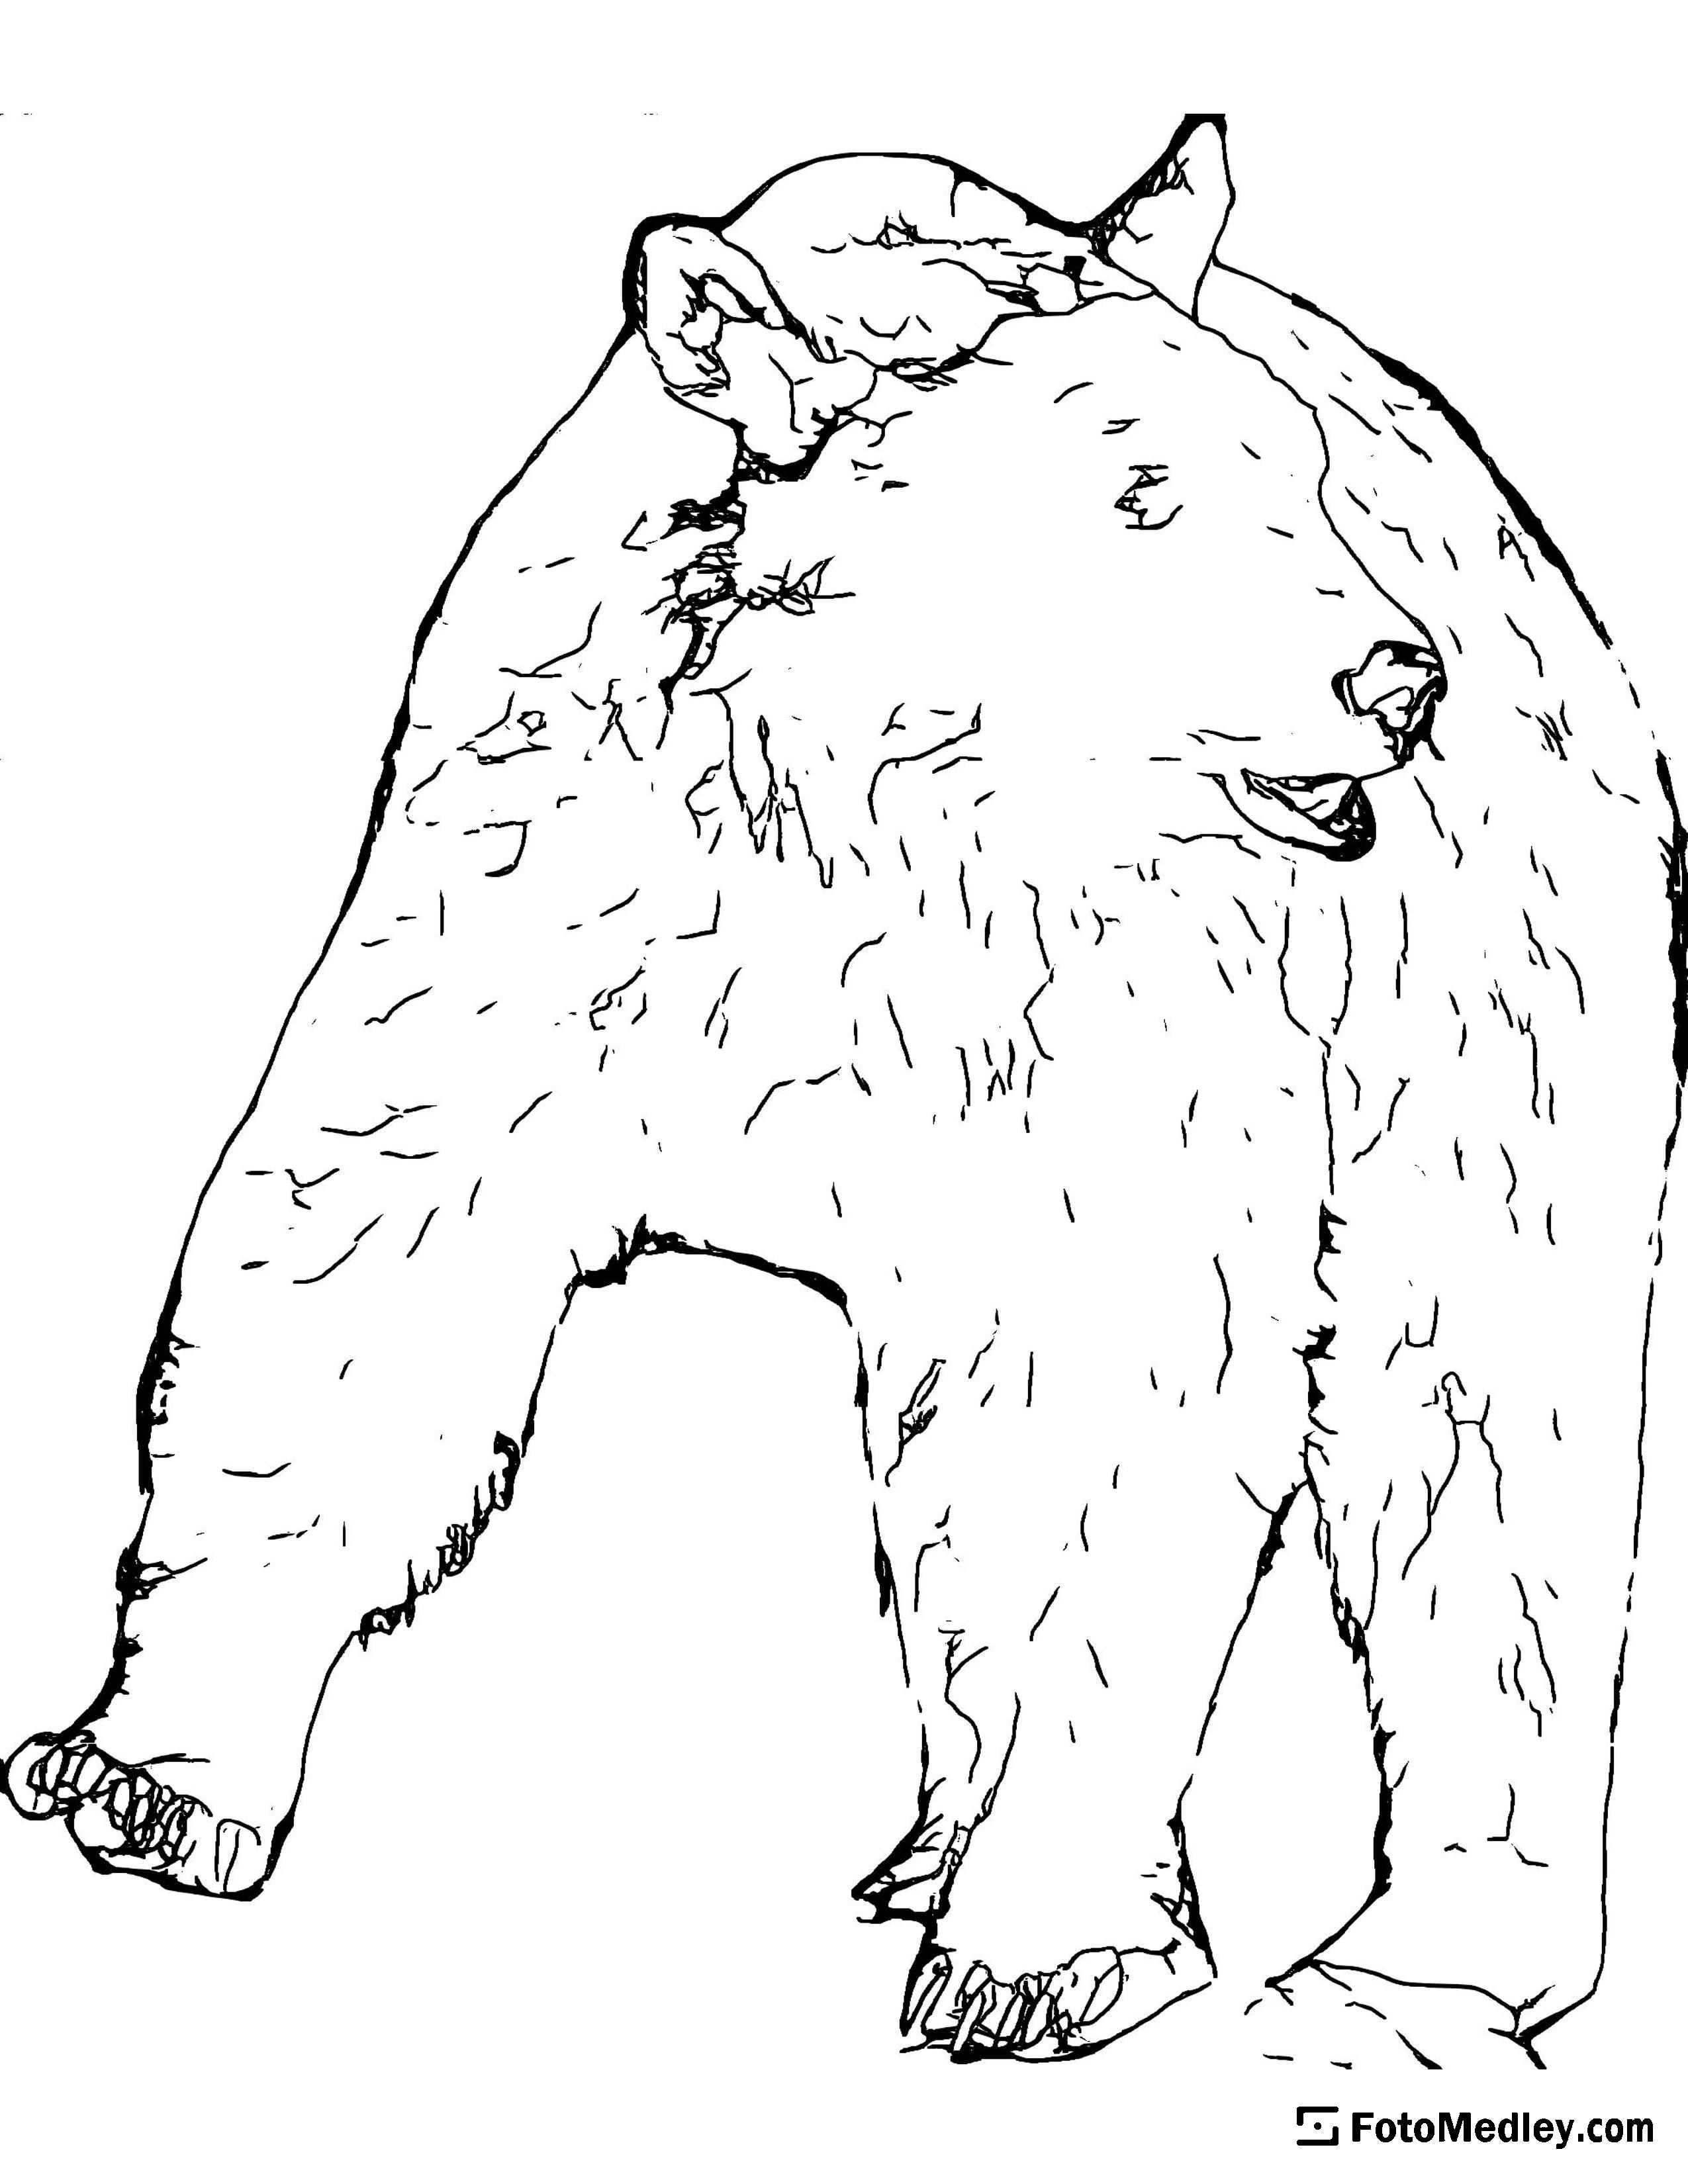 A coloring page of a bear wandering in the wild.